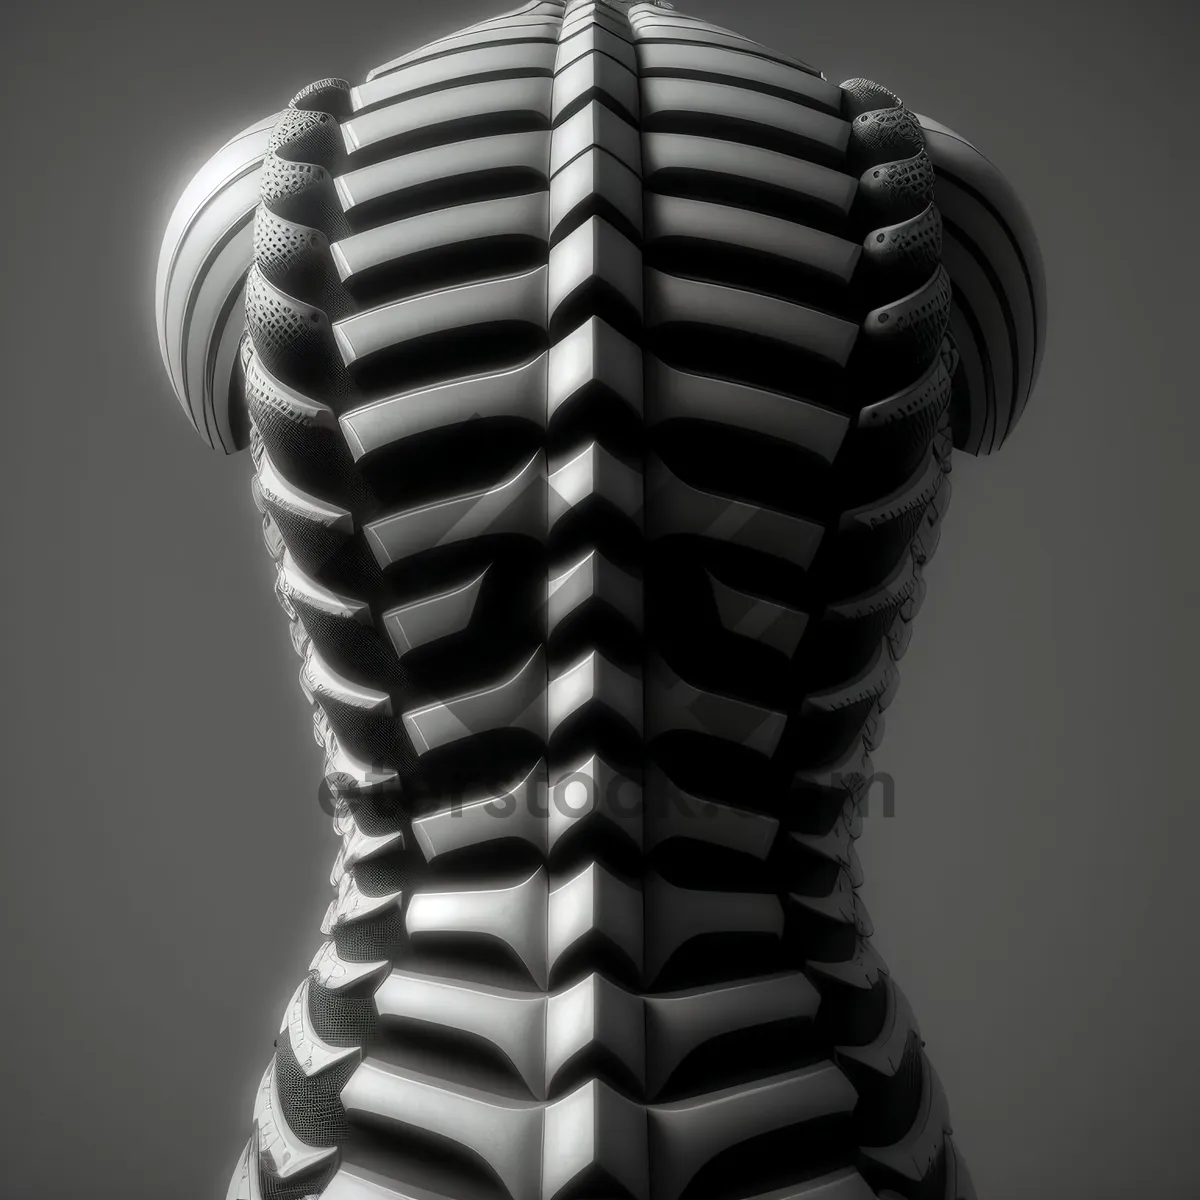 Picture of Transparent 3D X-ray of Inflamed Spine in Torso